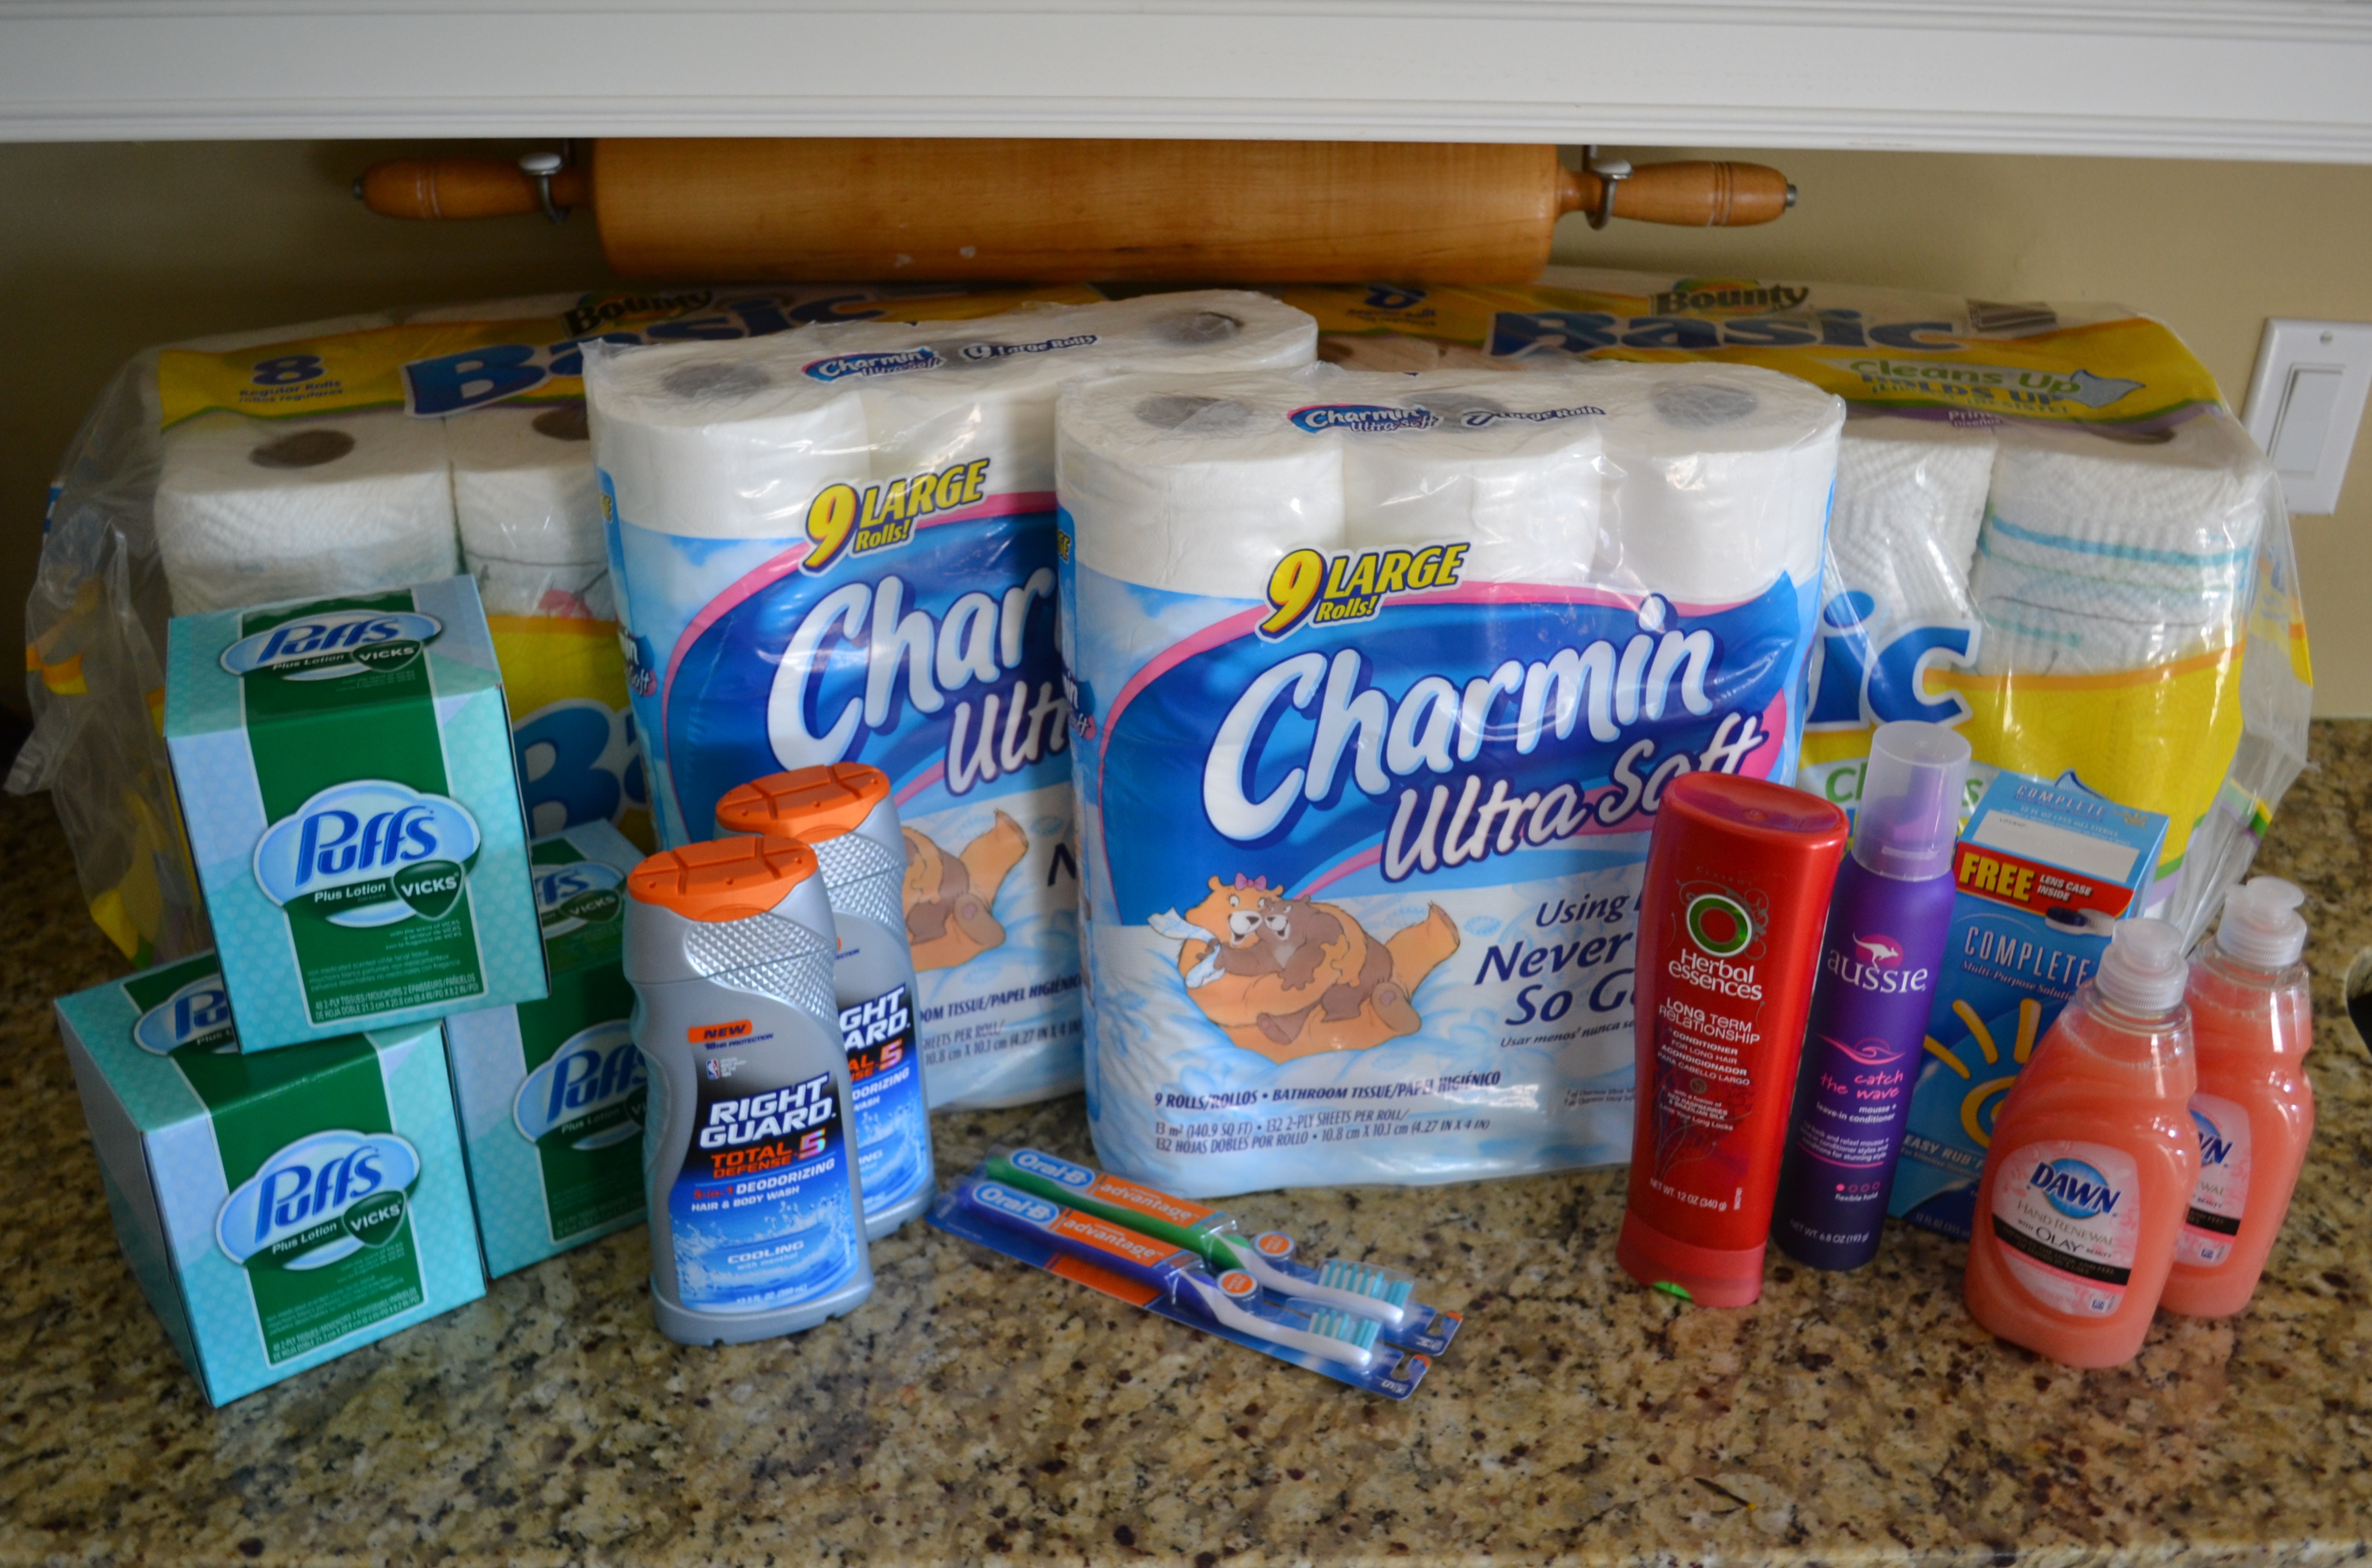 When you find a great deal on toilet paper, deodorant, tissue and other common items, stock up!